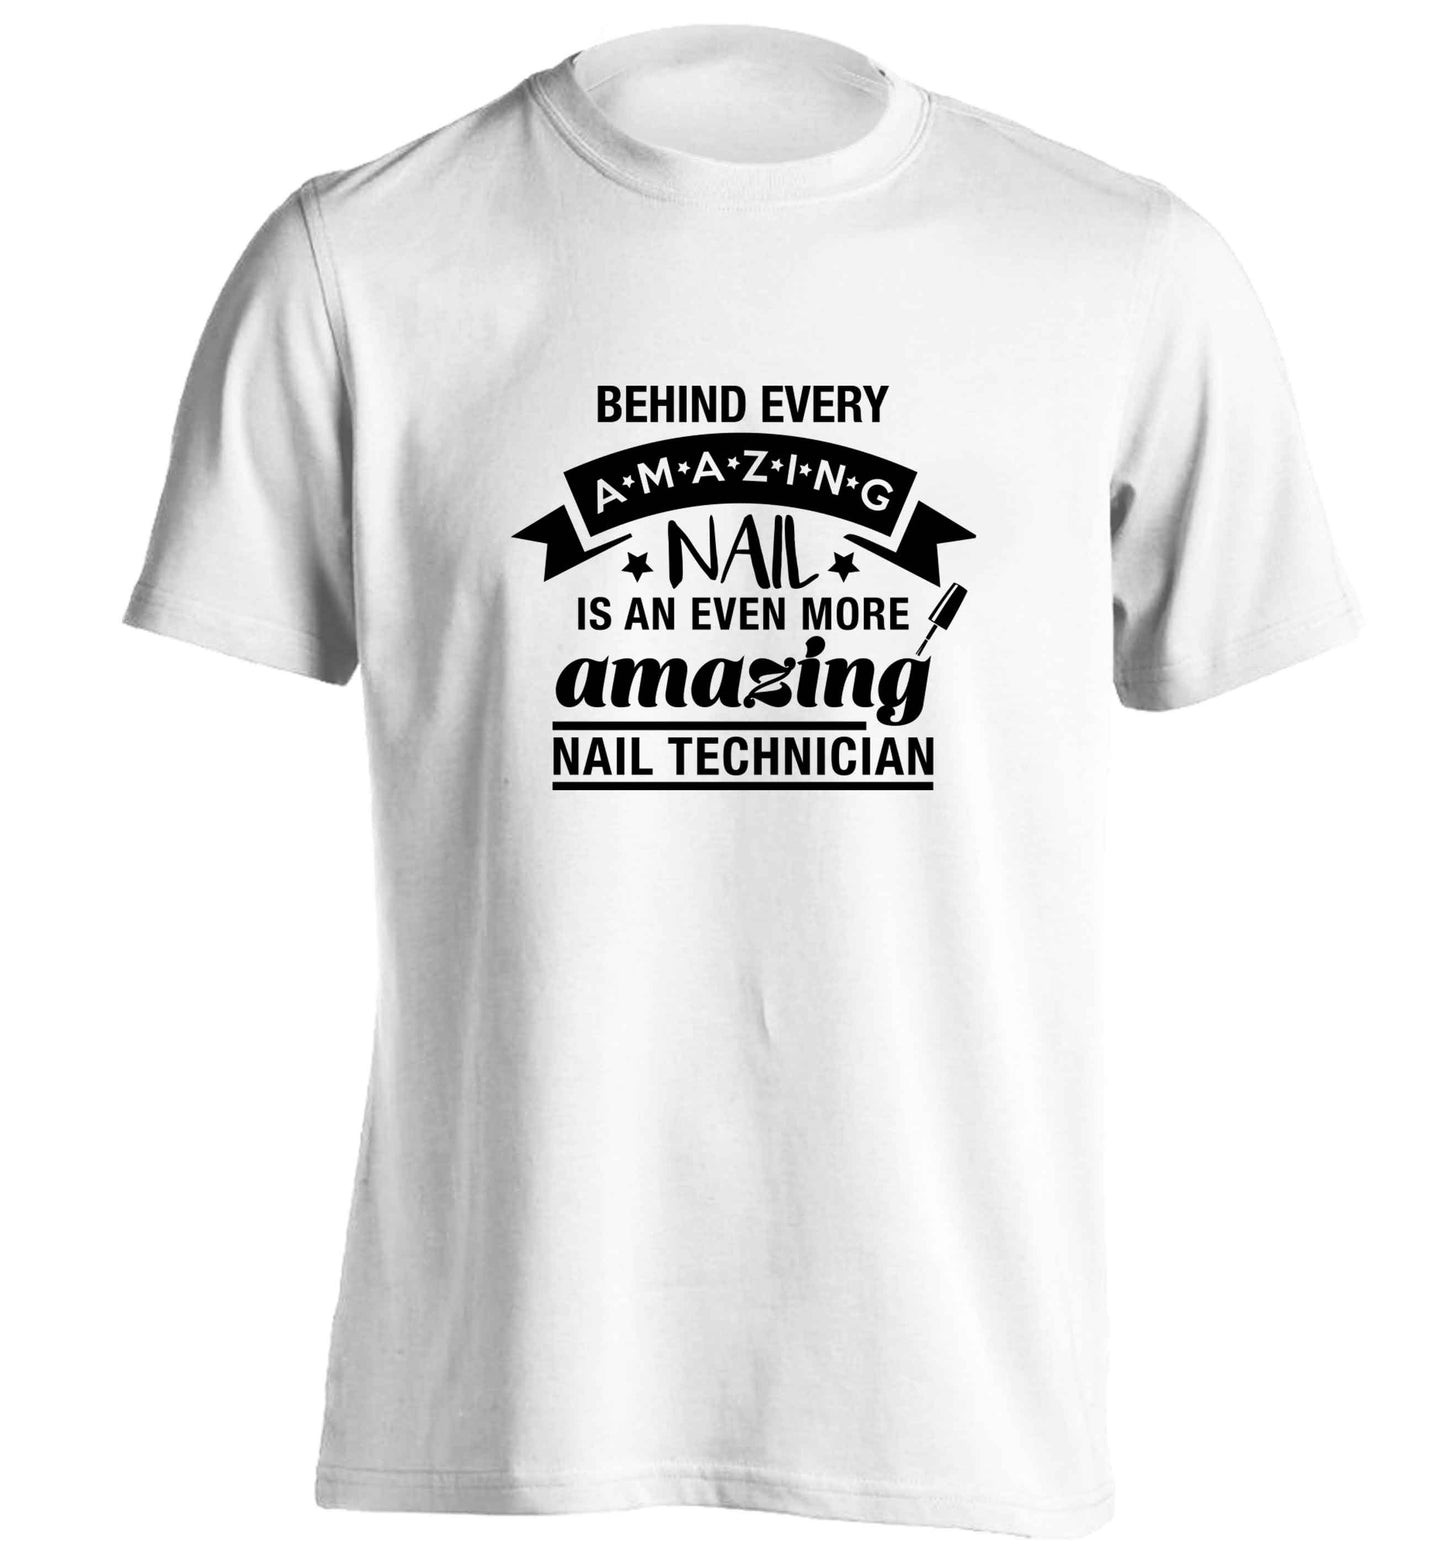 Behind every amazing nail is an even more amazing nail technician adults unisex white Tshirt 2XL